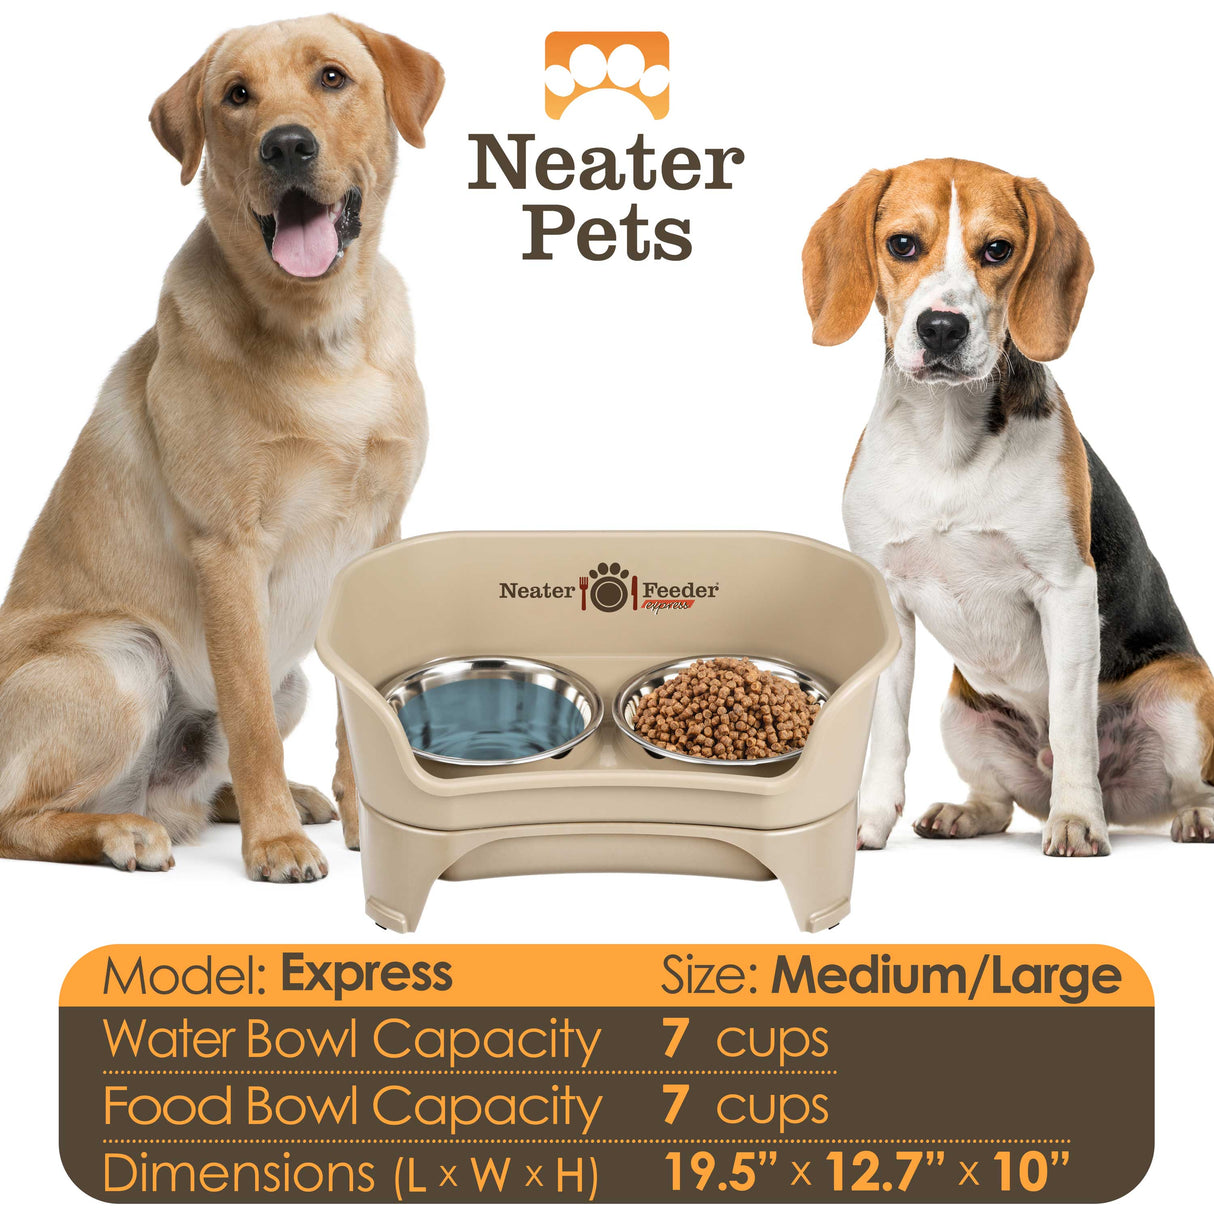 Information chart on Medium to large almond EXPRESS Neater Feeder